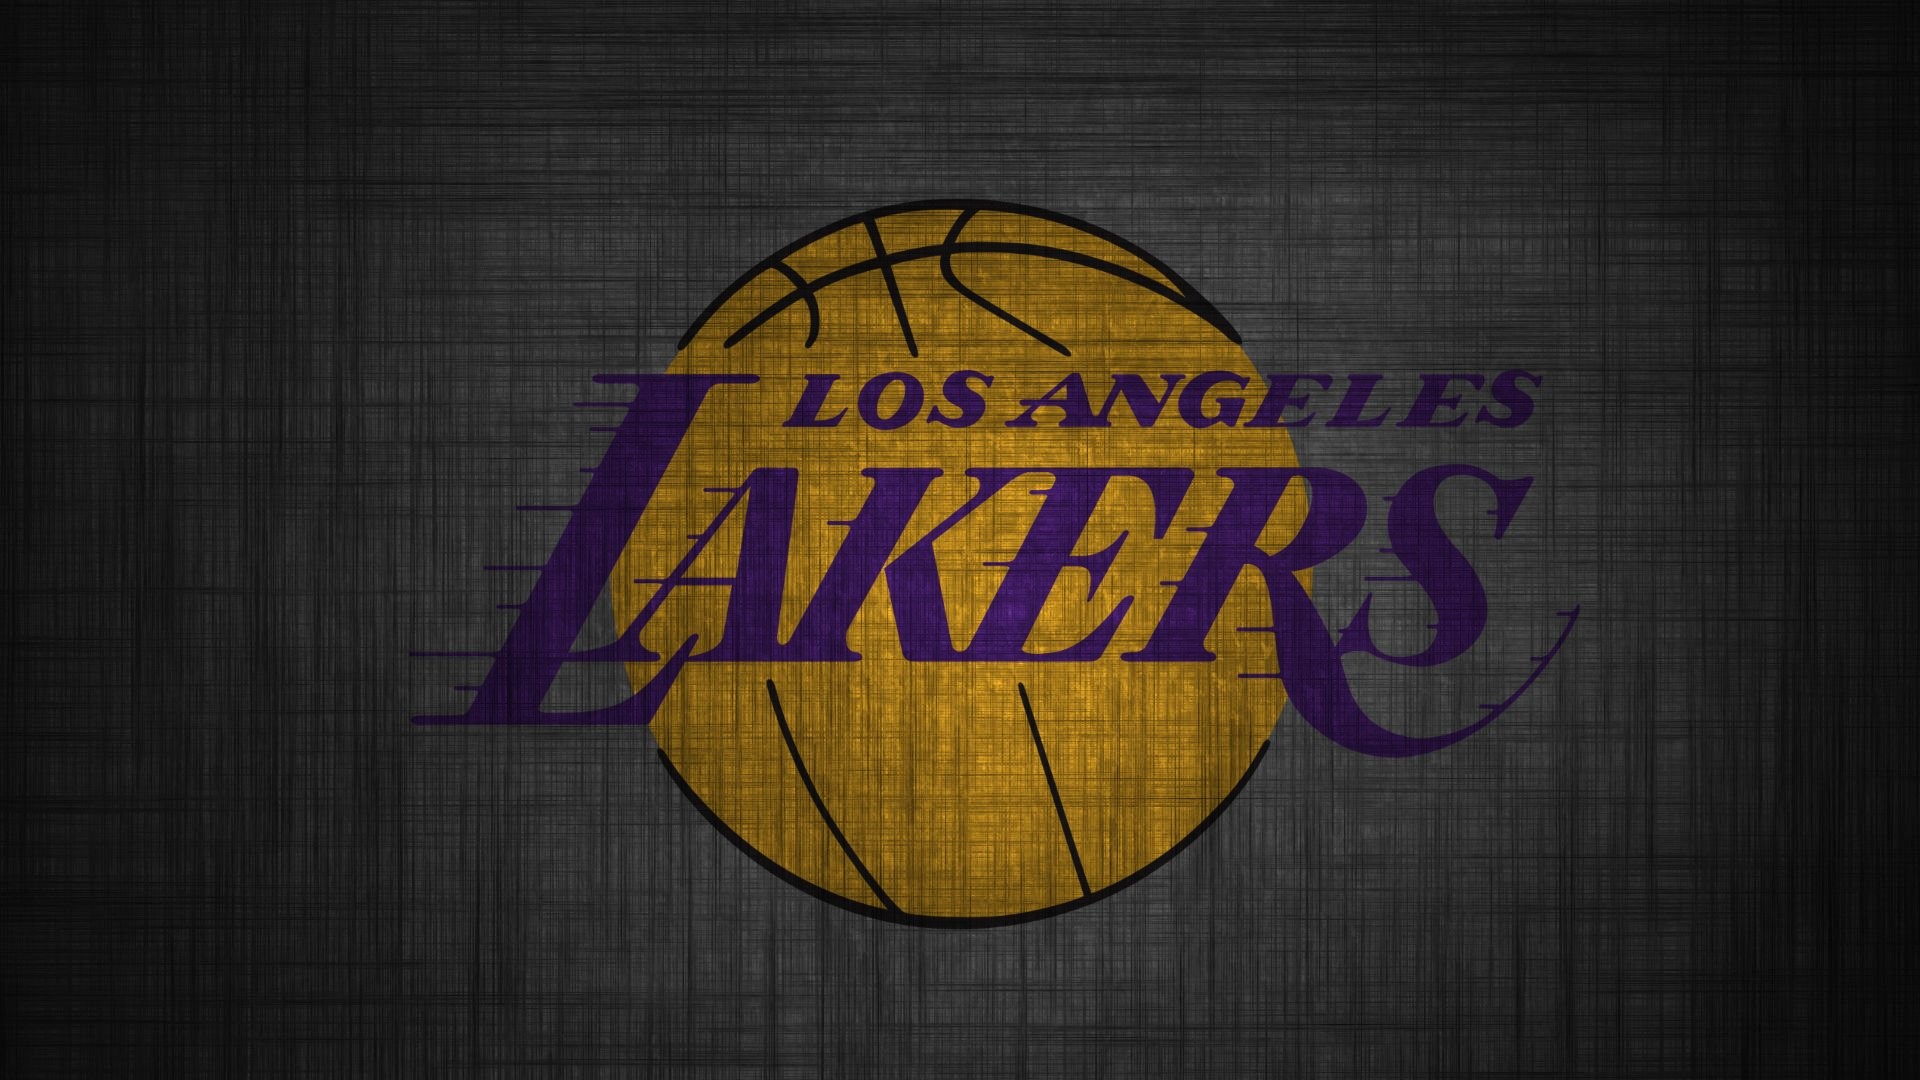 Lakers Wallpapers and Infographics Los Angeles Lakers 1500500 Lakers Wallpaper 43 Wallpapers Adorable Wallpapers Desktop Pinterest Lakers